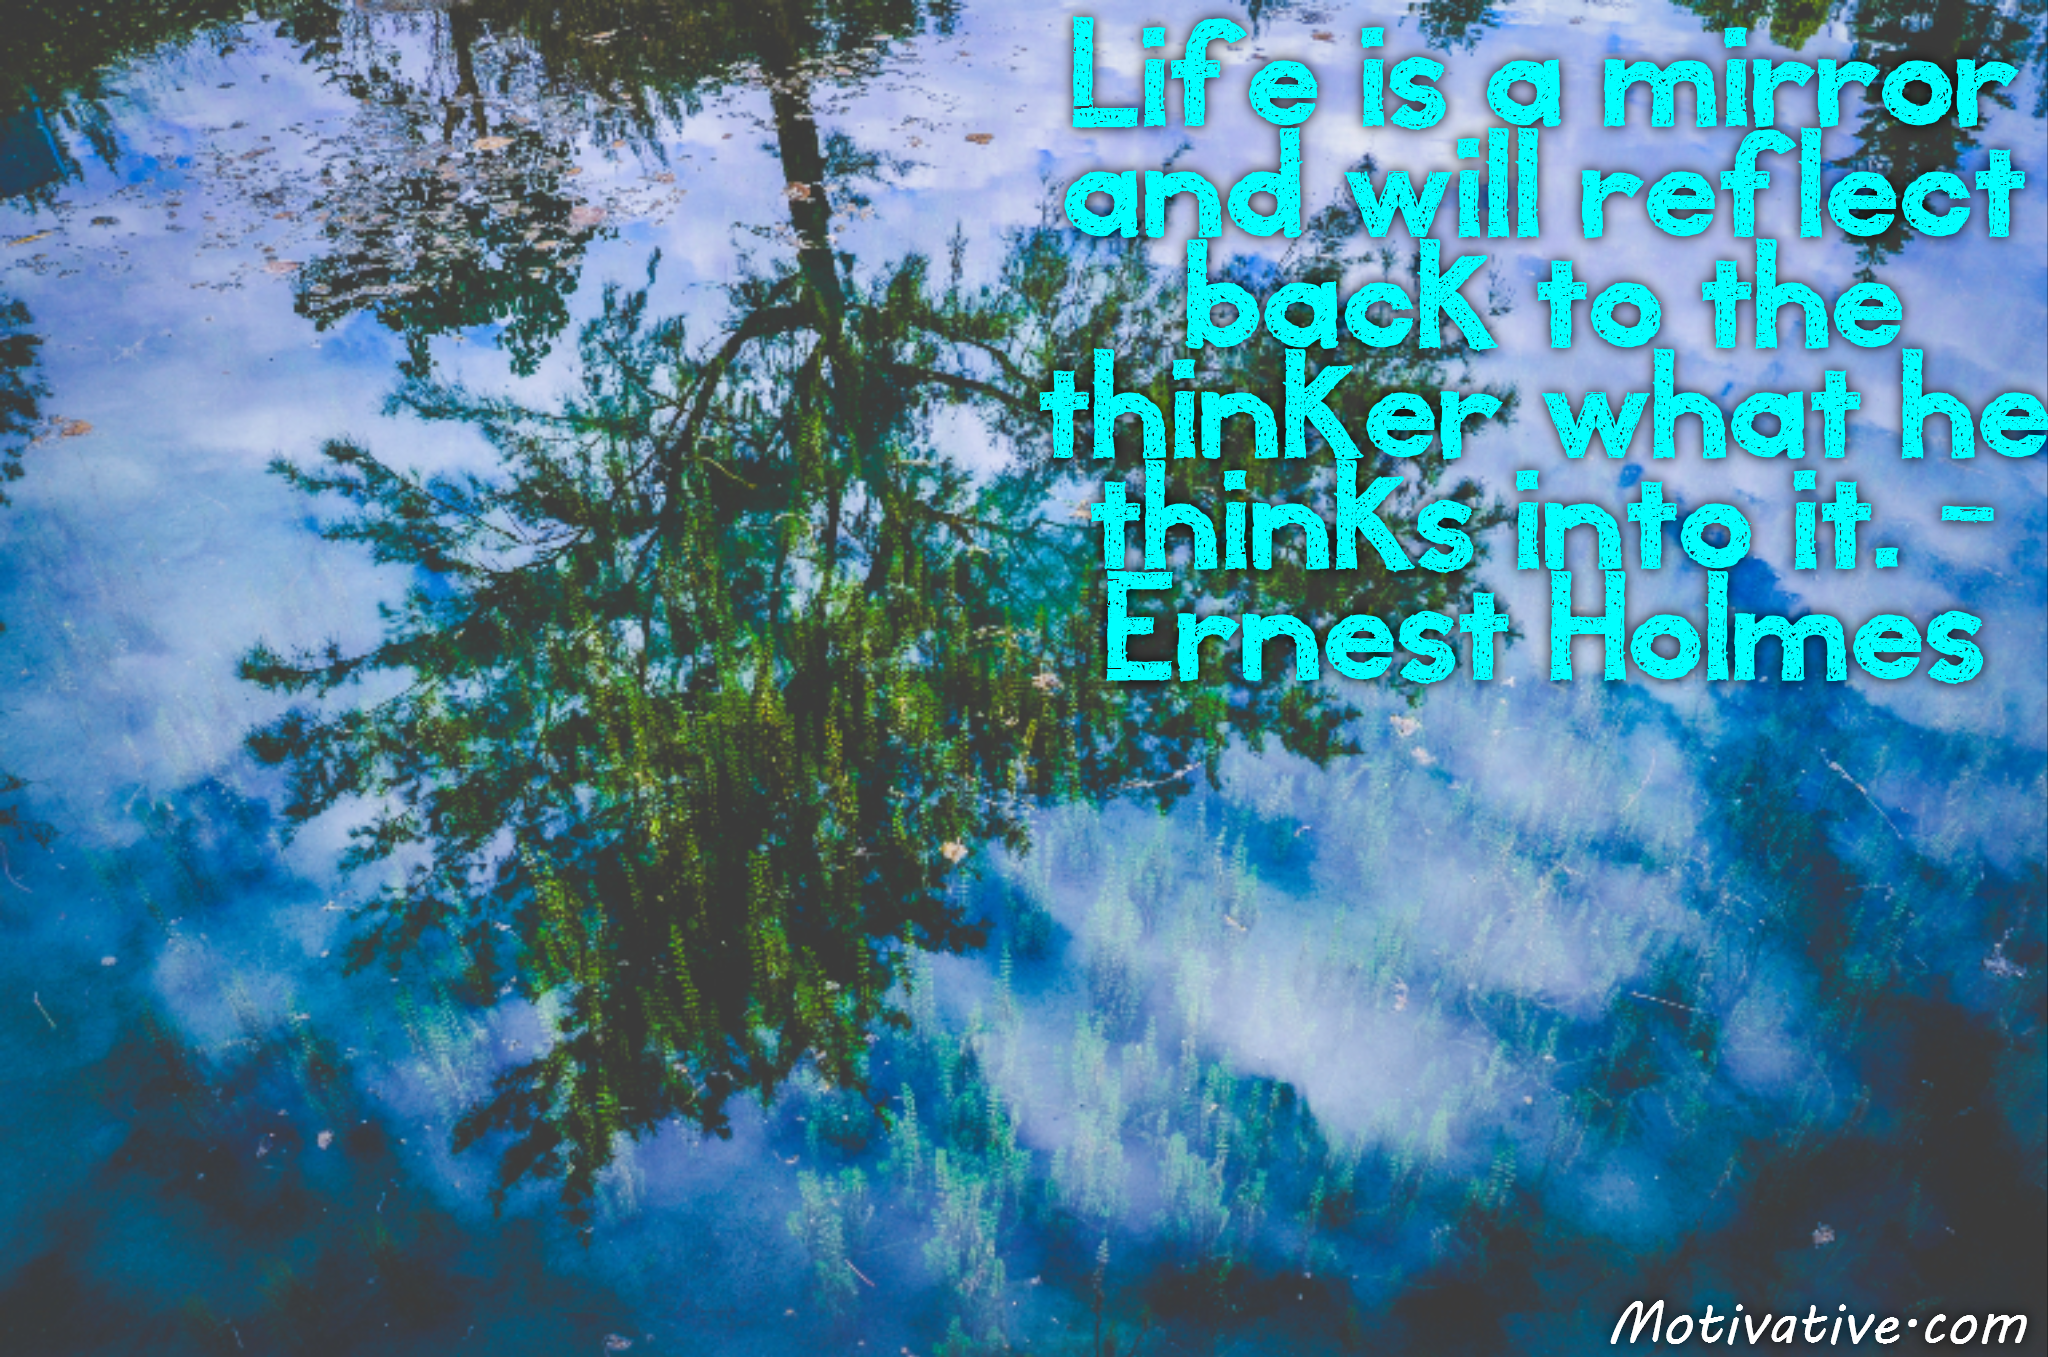 Life is a mirror and will reflect back to the thinker what he thinks into it. – Ernest Holmes